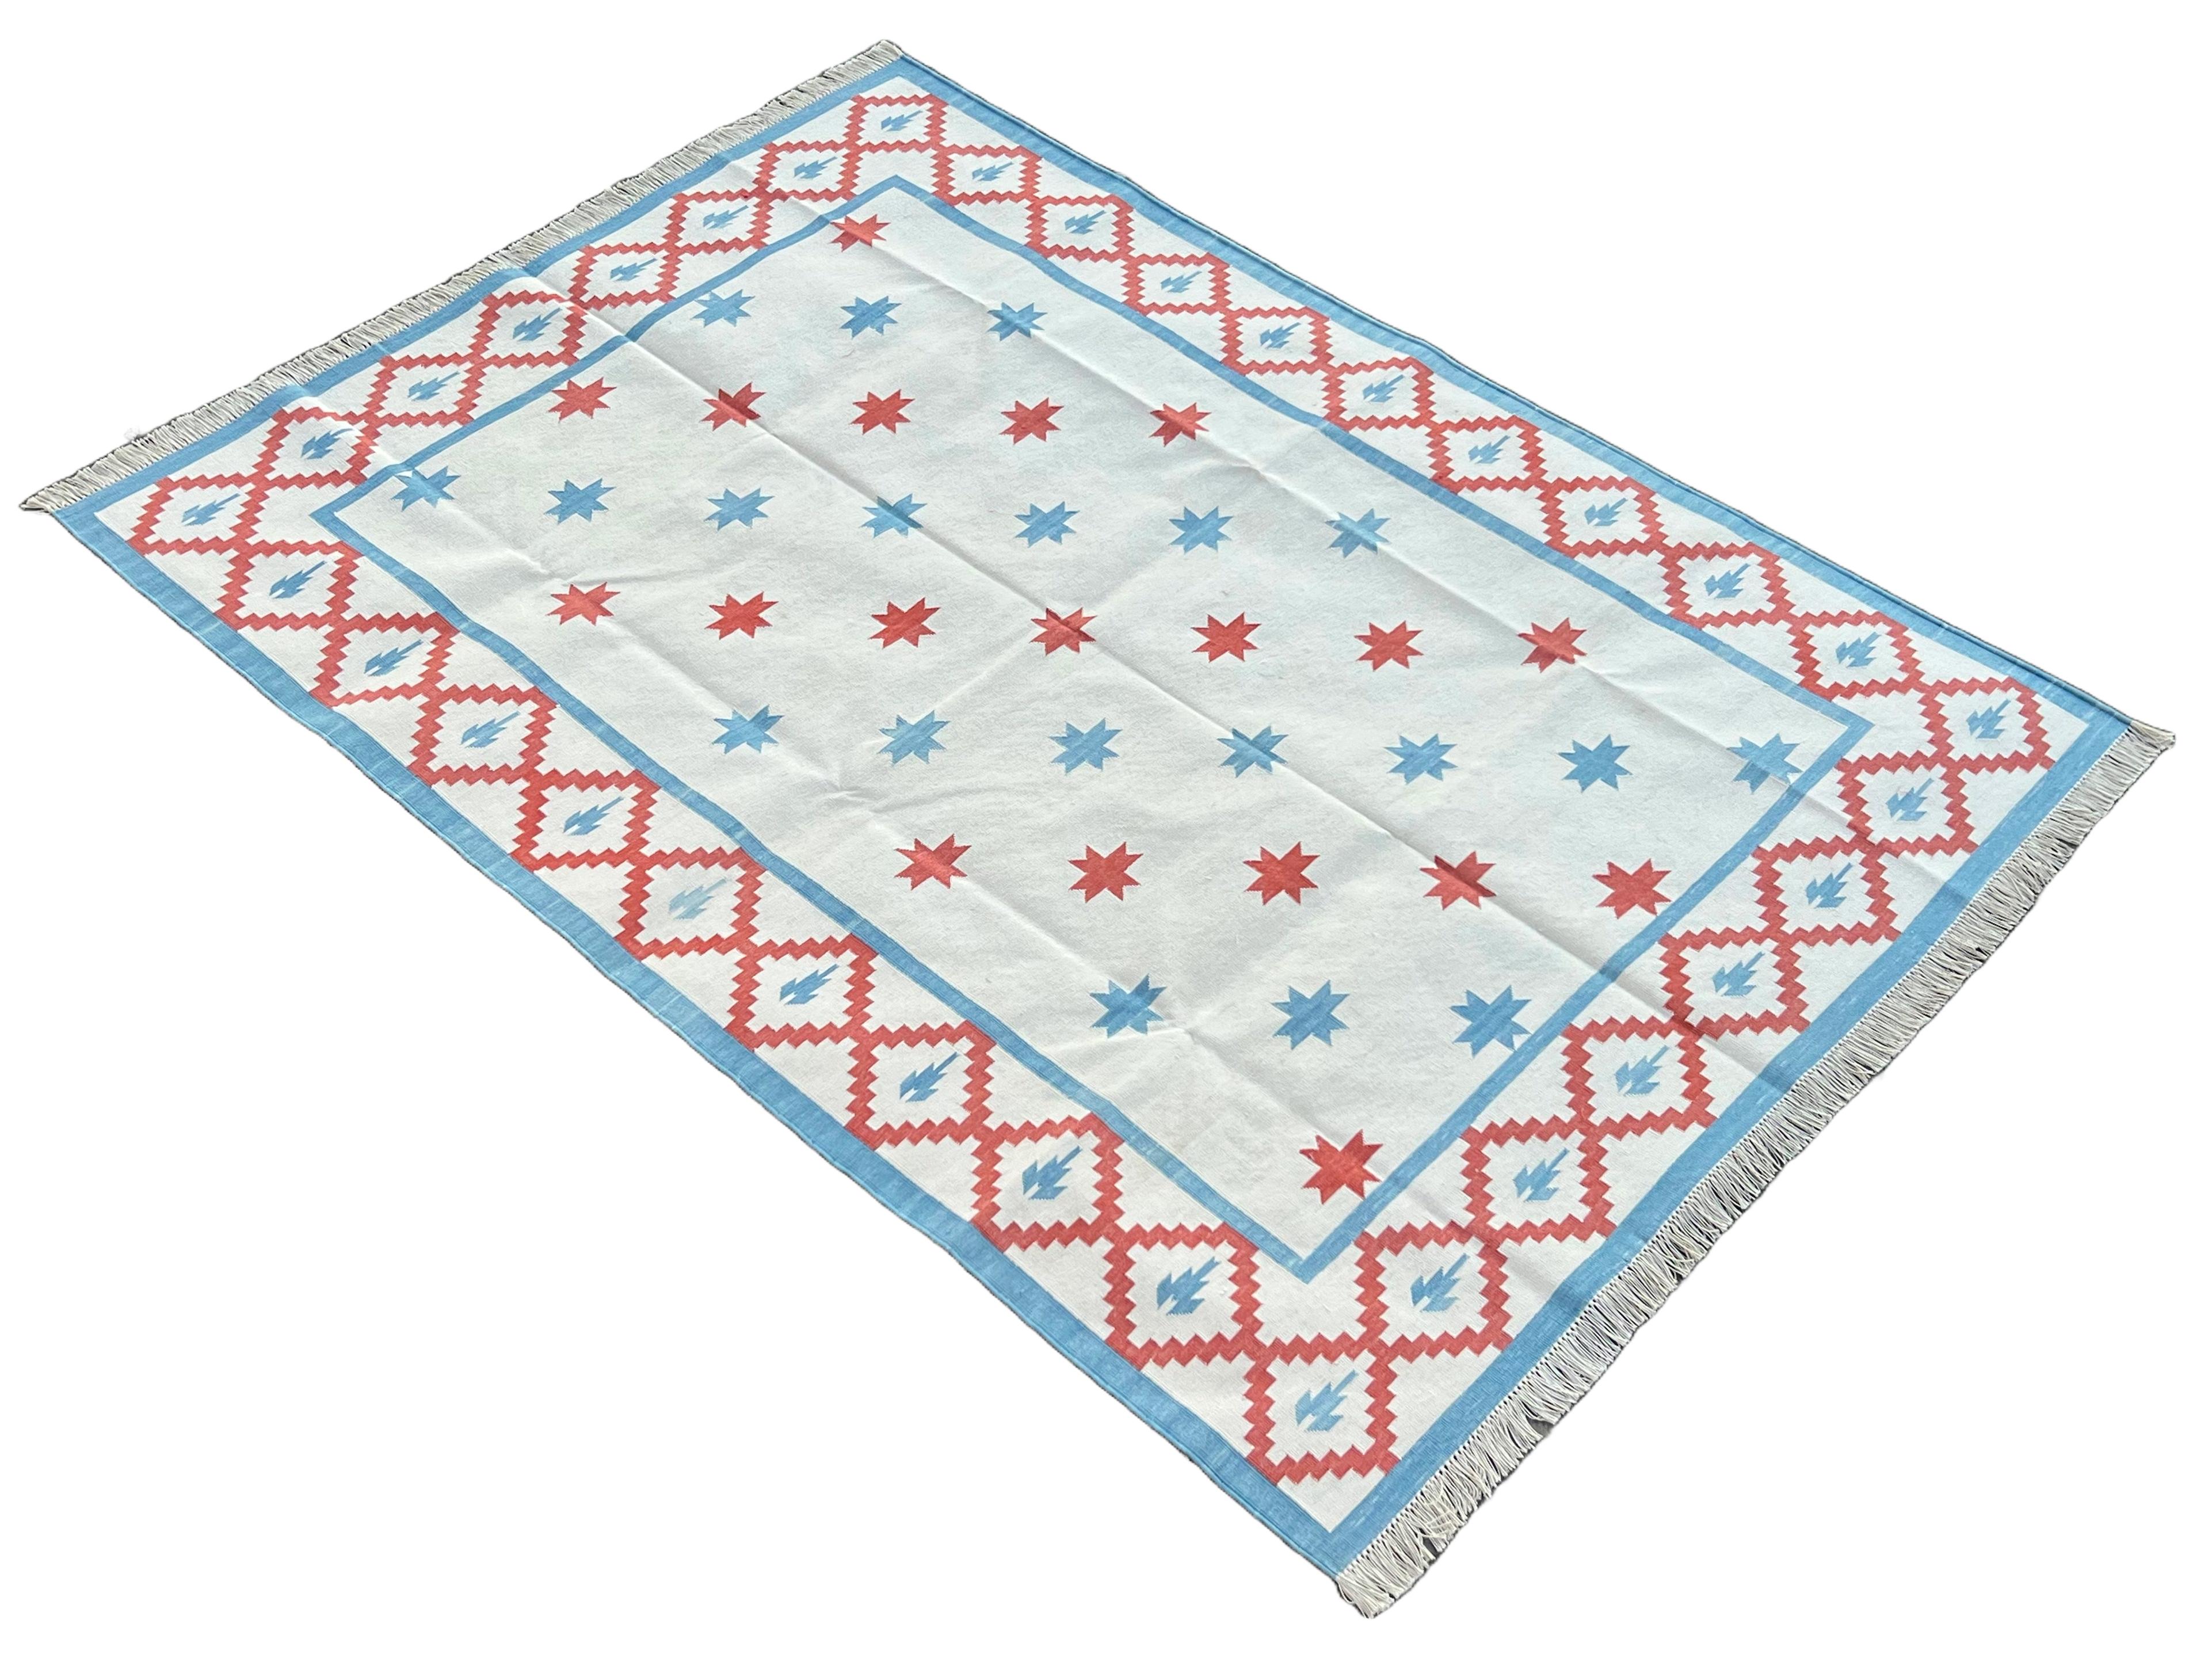 Cotton Vegetable Dyed Cream, Red And Sky Blue Star Indian Dhurrie Rug-5'x7' 
These special flat-weave dhurries are hand-woven with 15 ply 100% cotton yarn. Due to the special manufacturing techniques used to create our rugs, the size and color of